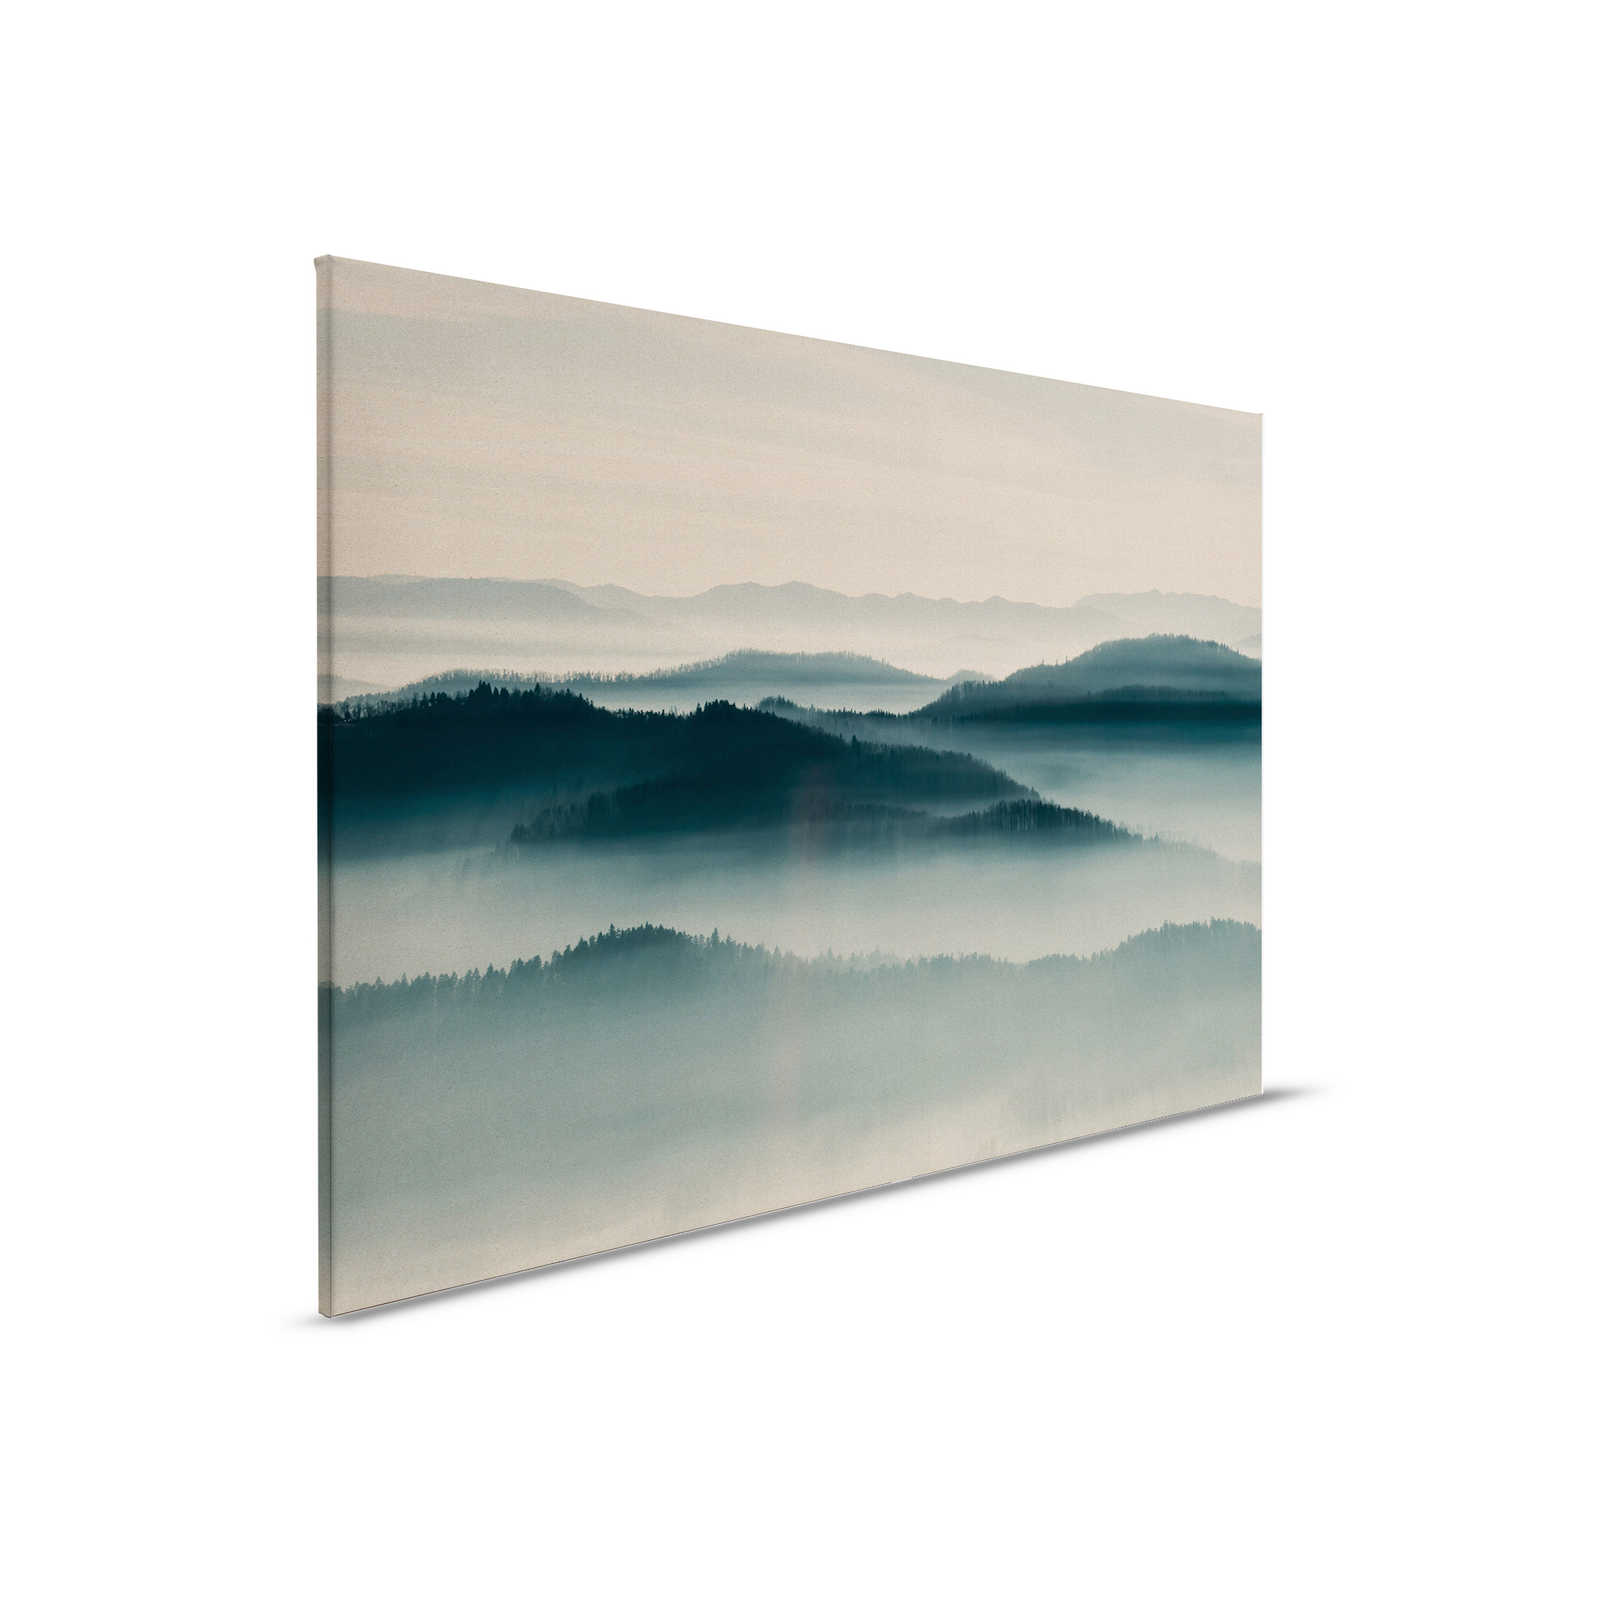         Horizon 1 - Canvas painting with fog landscape, nature Sky Line in cardboard structure - 0.90 m x 0.60 m
    